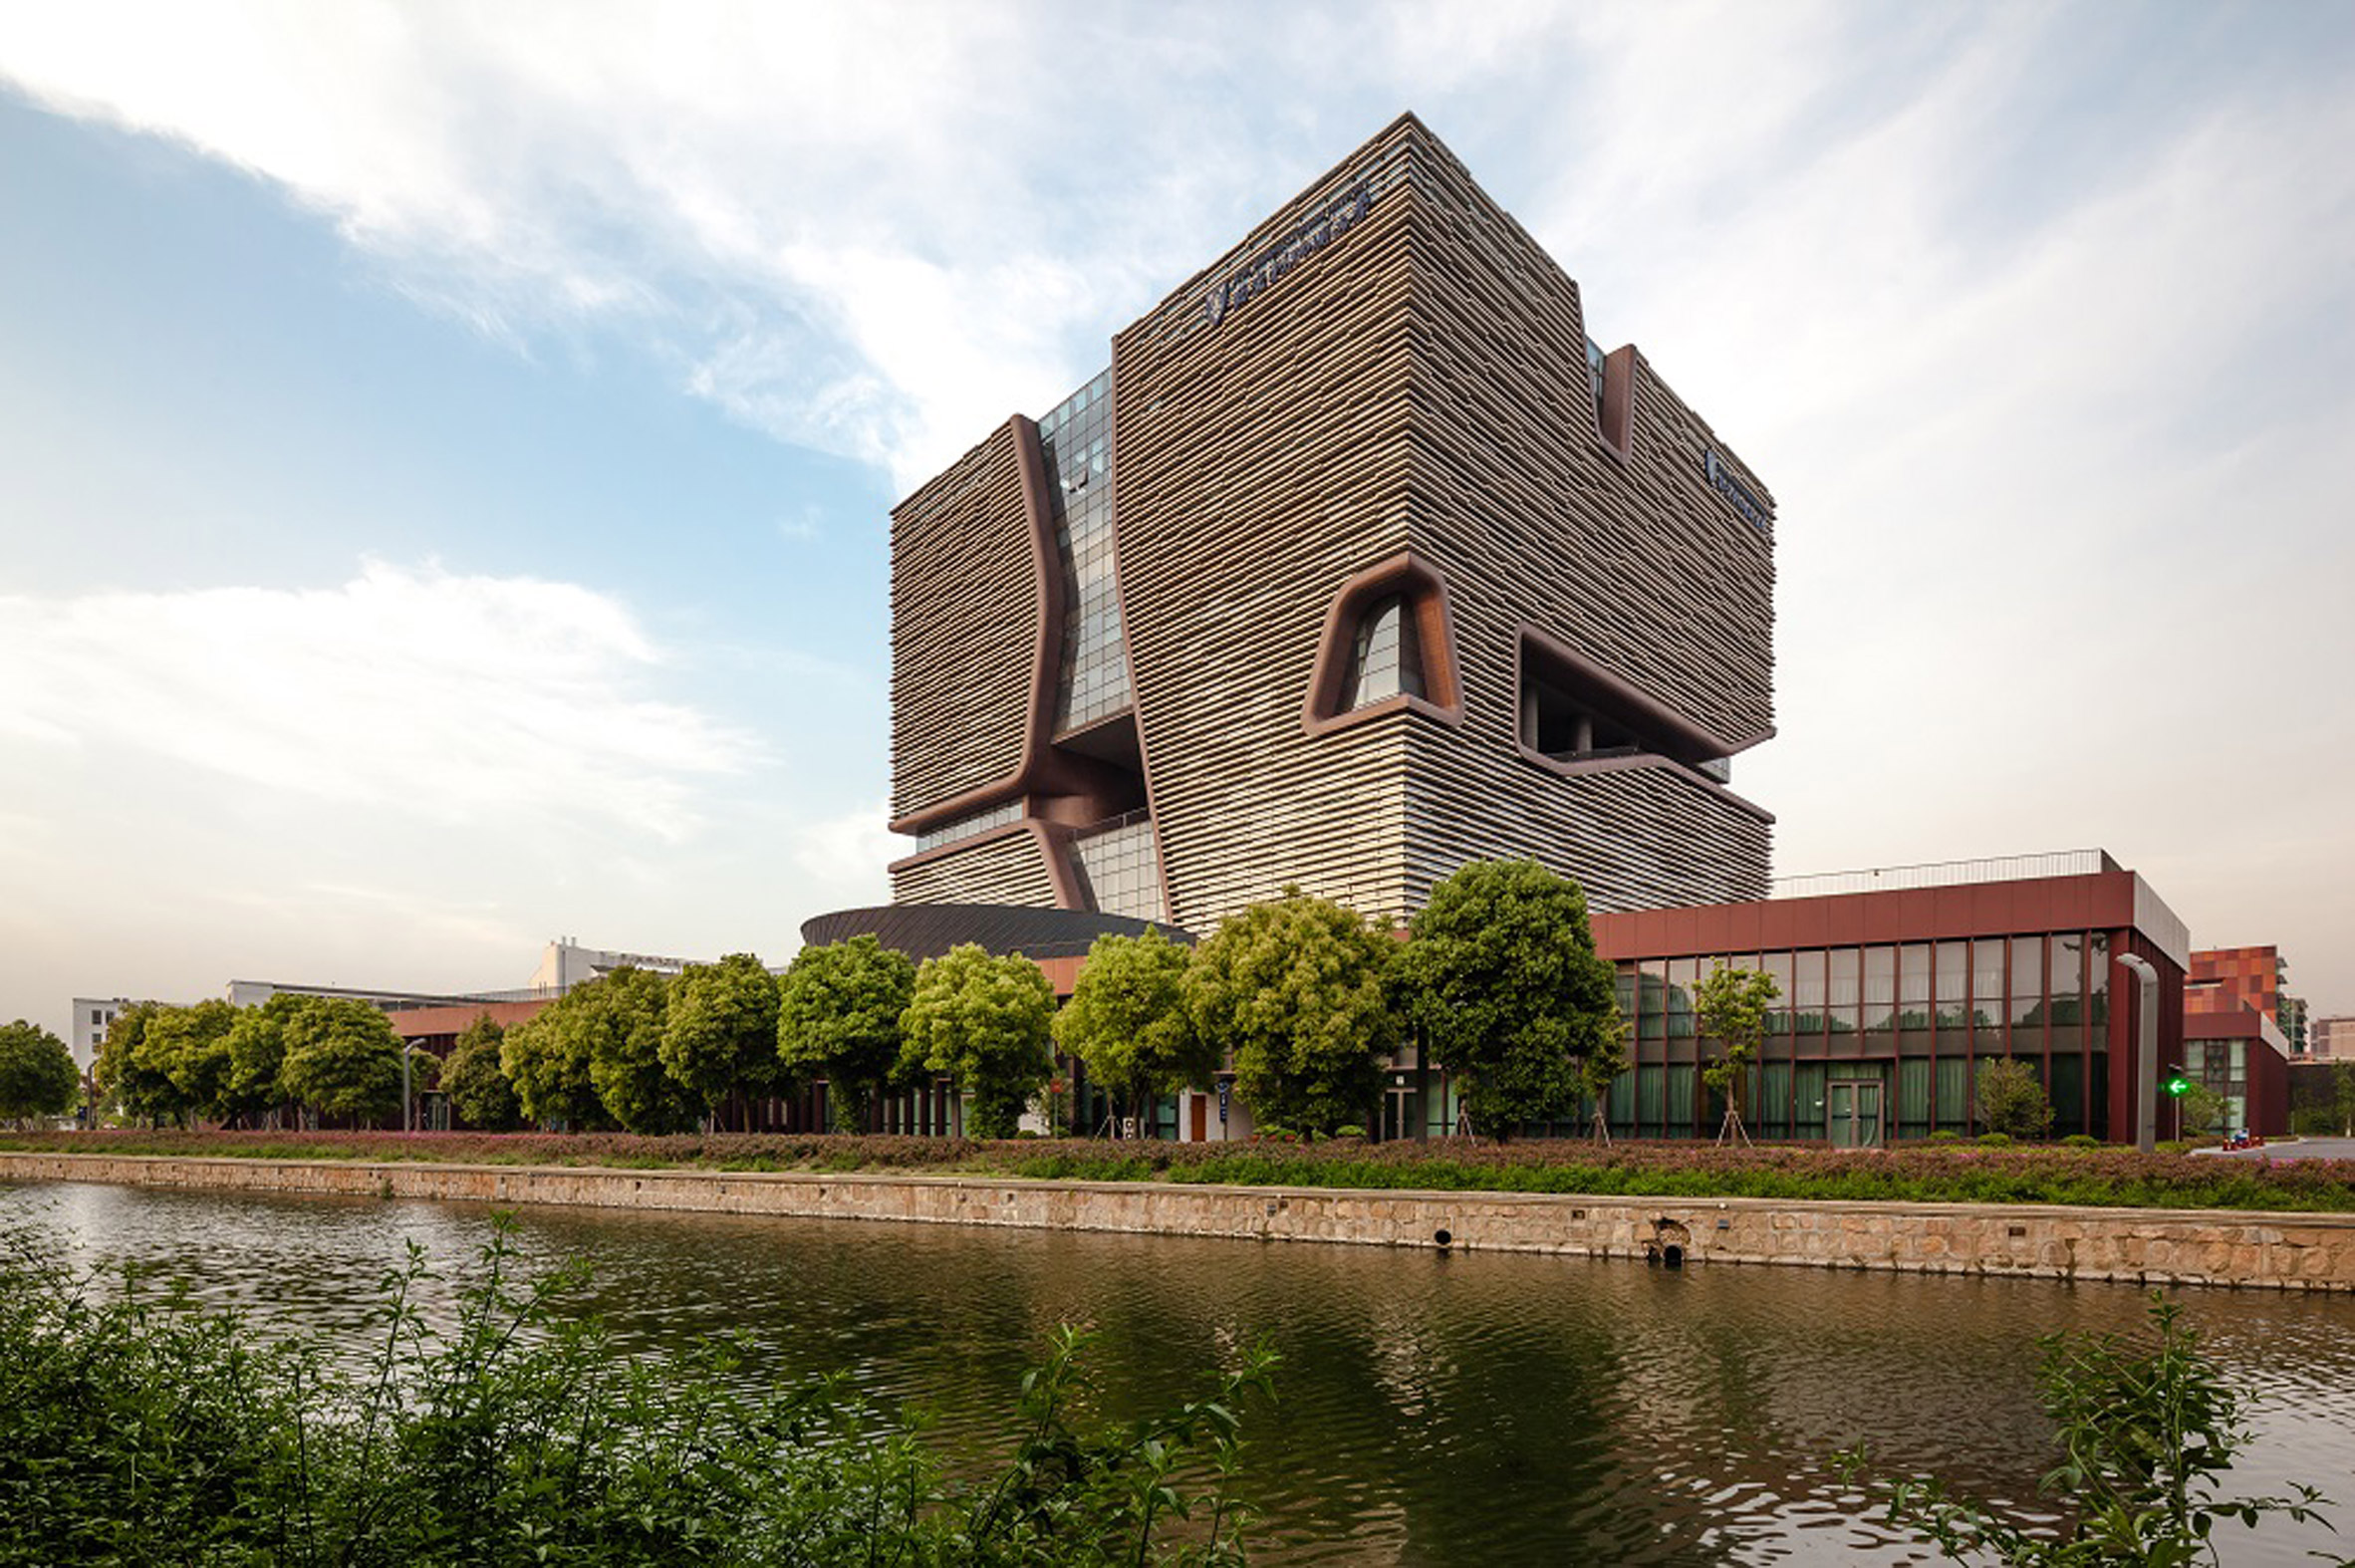 Exterior of the Xi'an Jiaotong Liverpool University in China